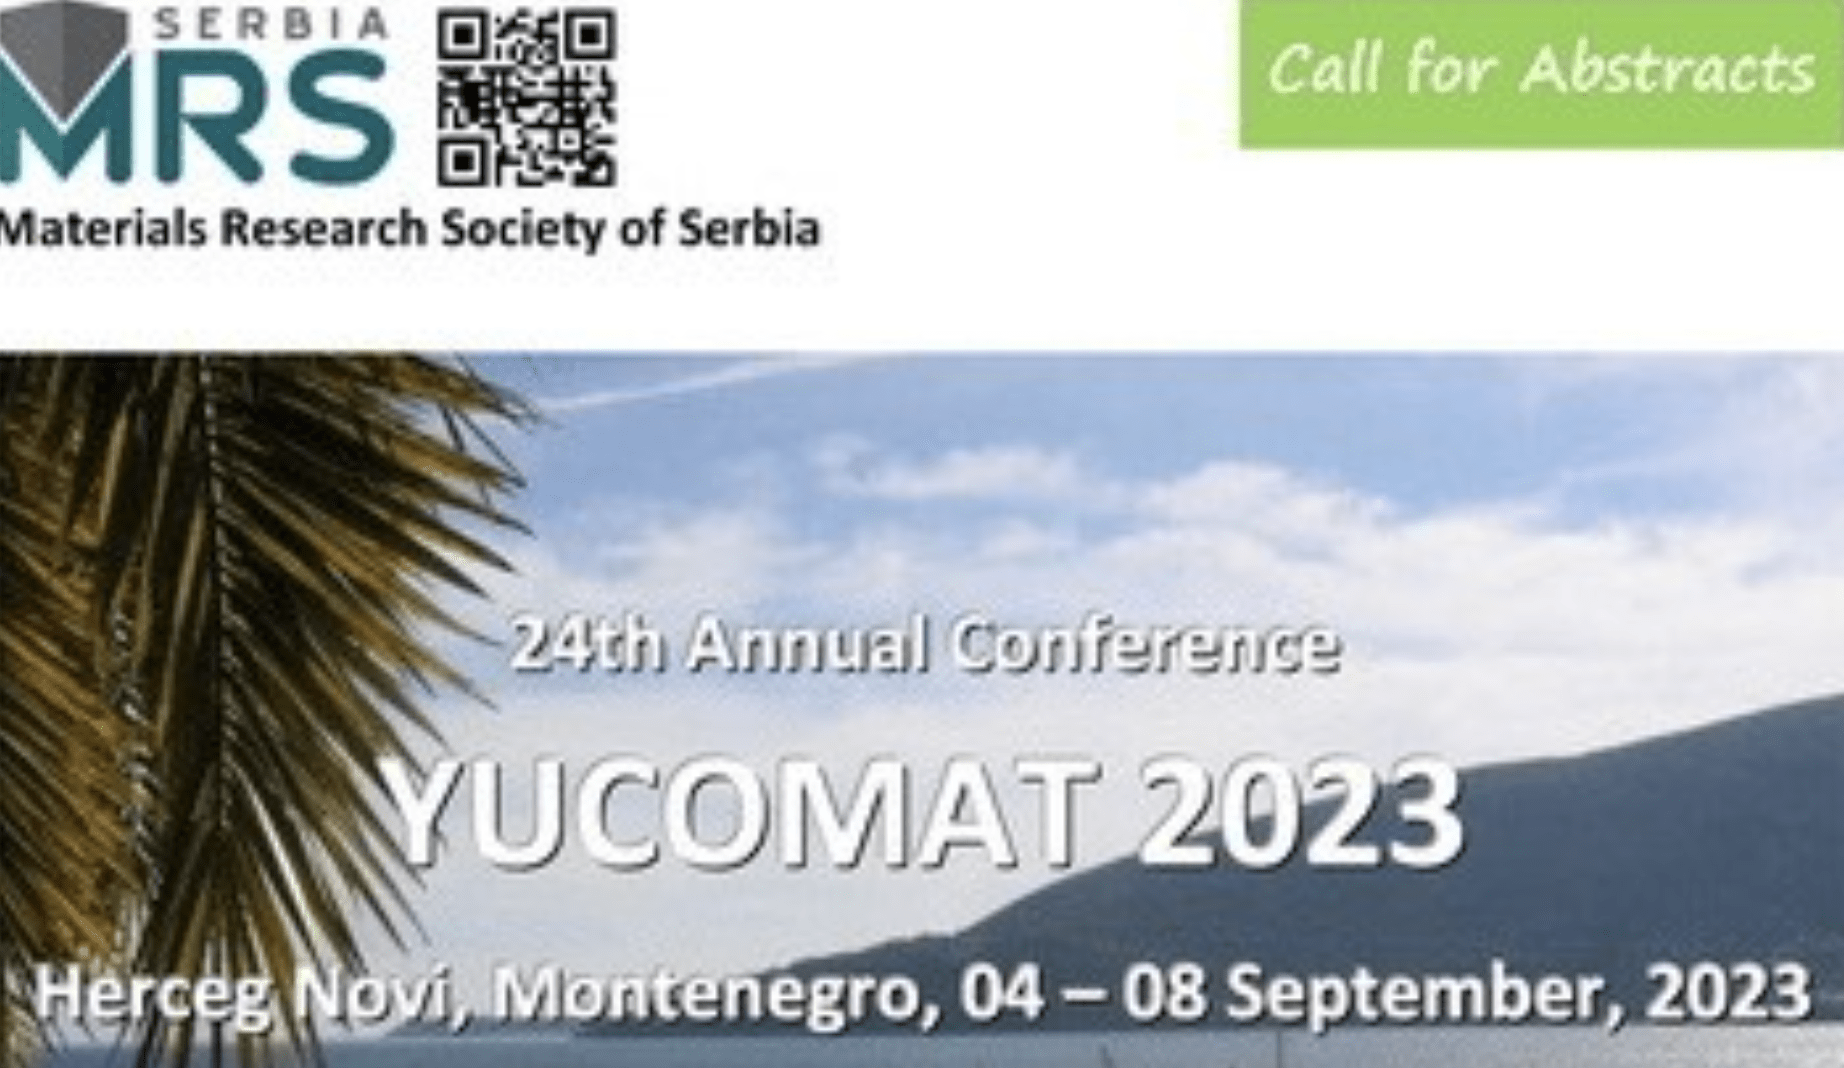 Extended! Submit your Abstract for the YUCOMAT through May 31!